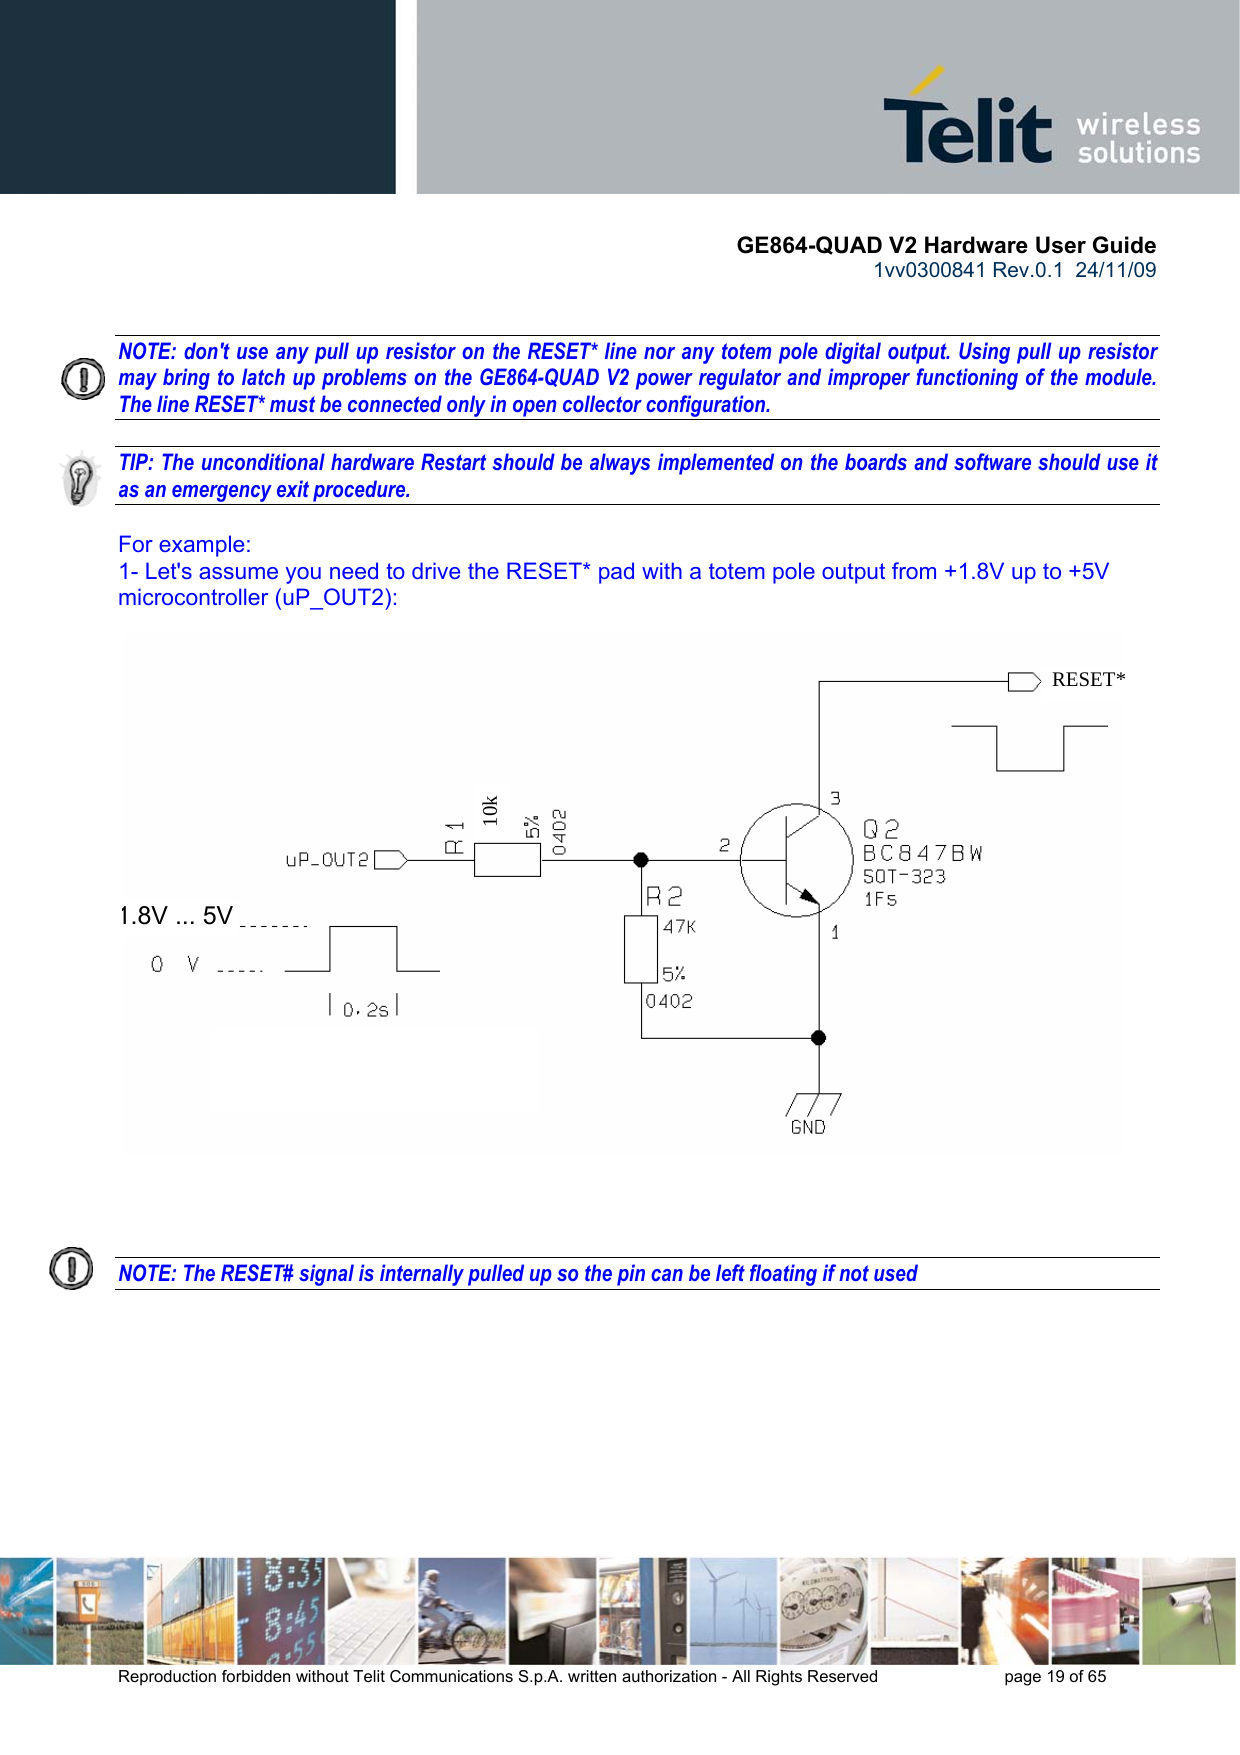       GE864-QUAD V2 Hardware User Guide 1vv0300841 Rev.0.1  24/11/09      Reproduction forbidden without Telit Communications S.p.A. written authorization - All Rights Reserved    page 19 of 65    NOTE: don&apos;t use any pull up resistor on the RESET* line nor any totem pole digital output. Using pull up resistor may bring to latch up problems on the GE864-QUAD V2 power regulator and improper functioning of the module. The line RESET* must be connected only in open collector configuration.  TIP: The unconditional hardware Restart should be always implemented on the boards and software should use it as an emergency exit procedure.  For example: 1- Let&apos;s assume you need to drive the RESET* pad with a totem pole output from +1.8V up to +5V microcontroller (uP_OUT2):     NOTE: The RESET# signal is internally pulled up so the pin can be left floating if not used    10k   RESET*1.8V ... 5V 